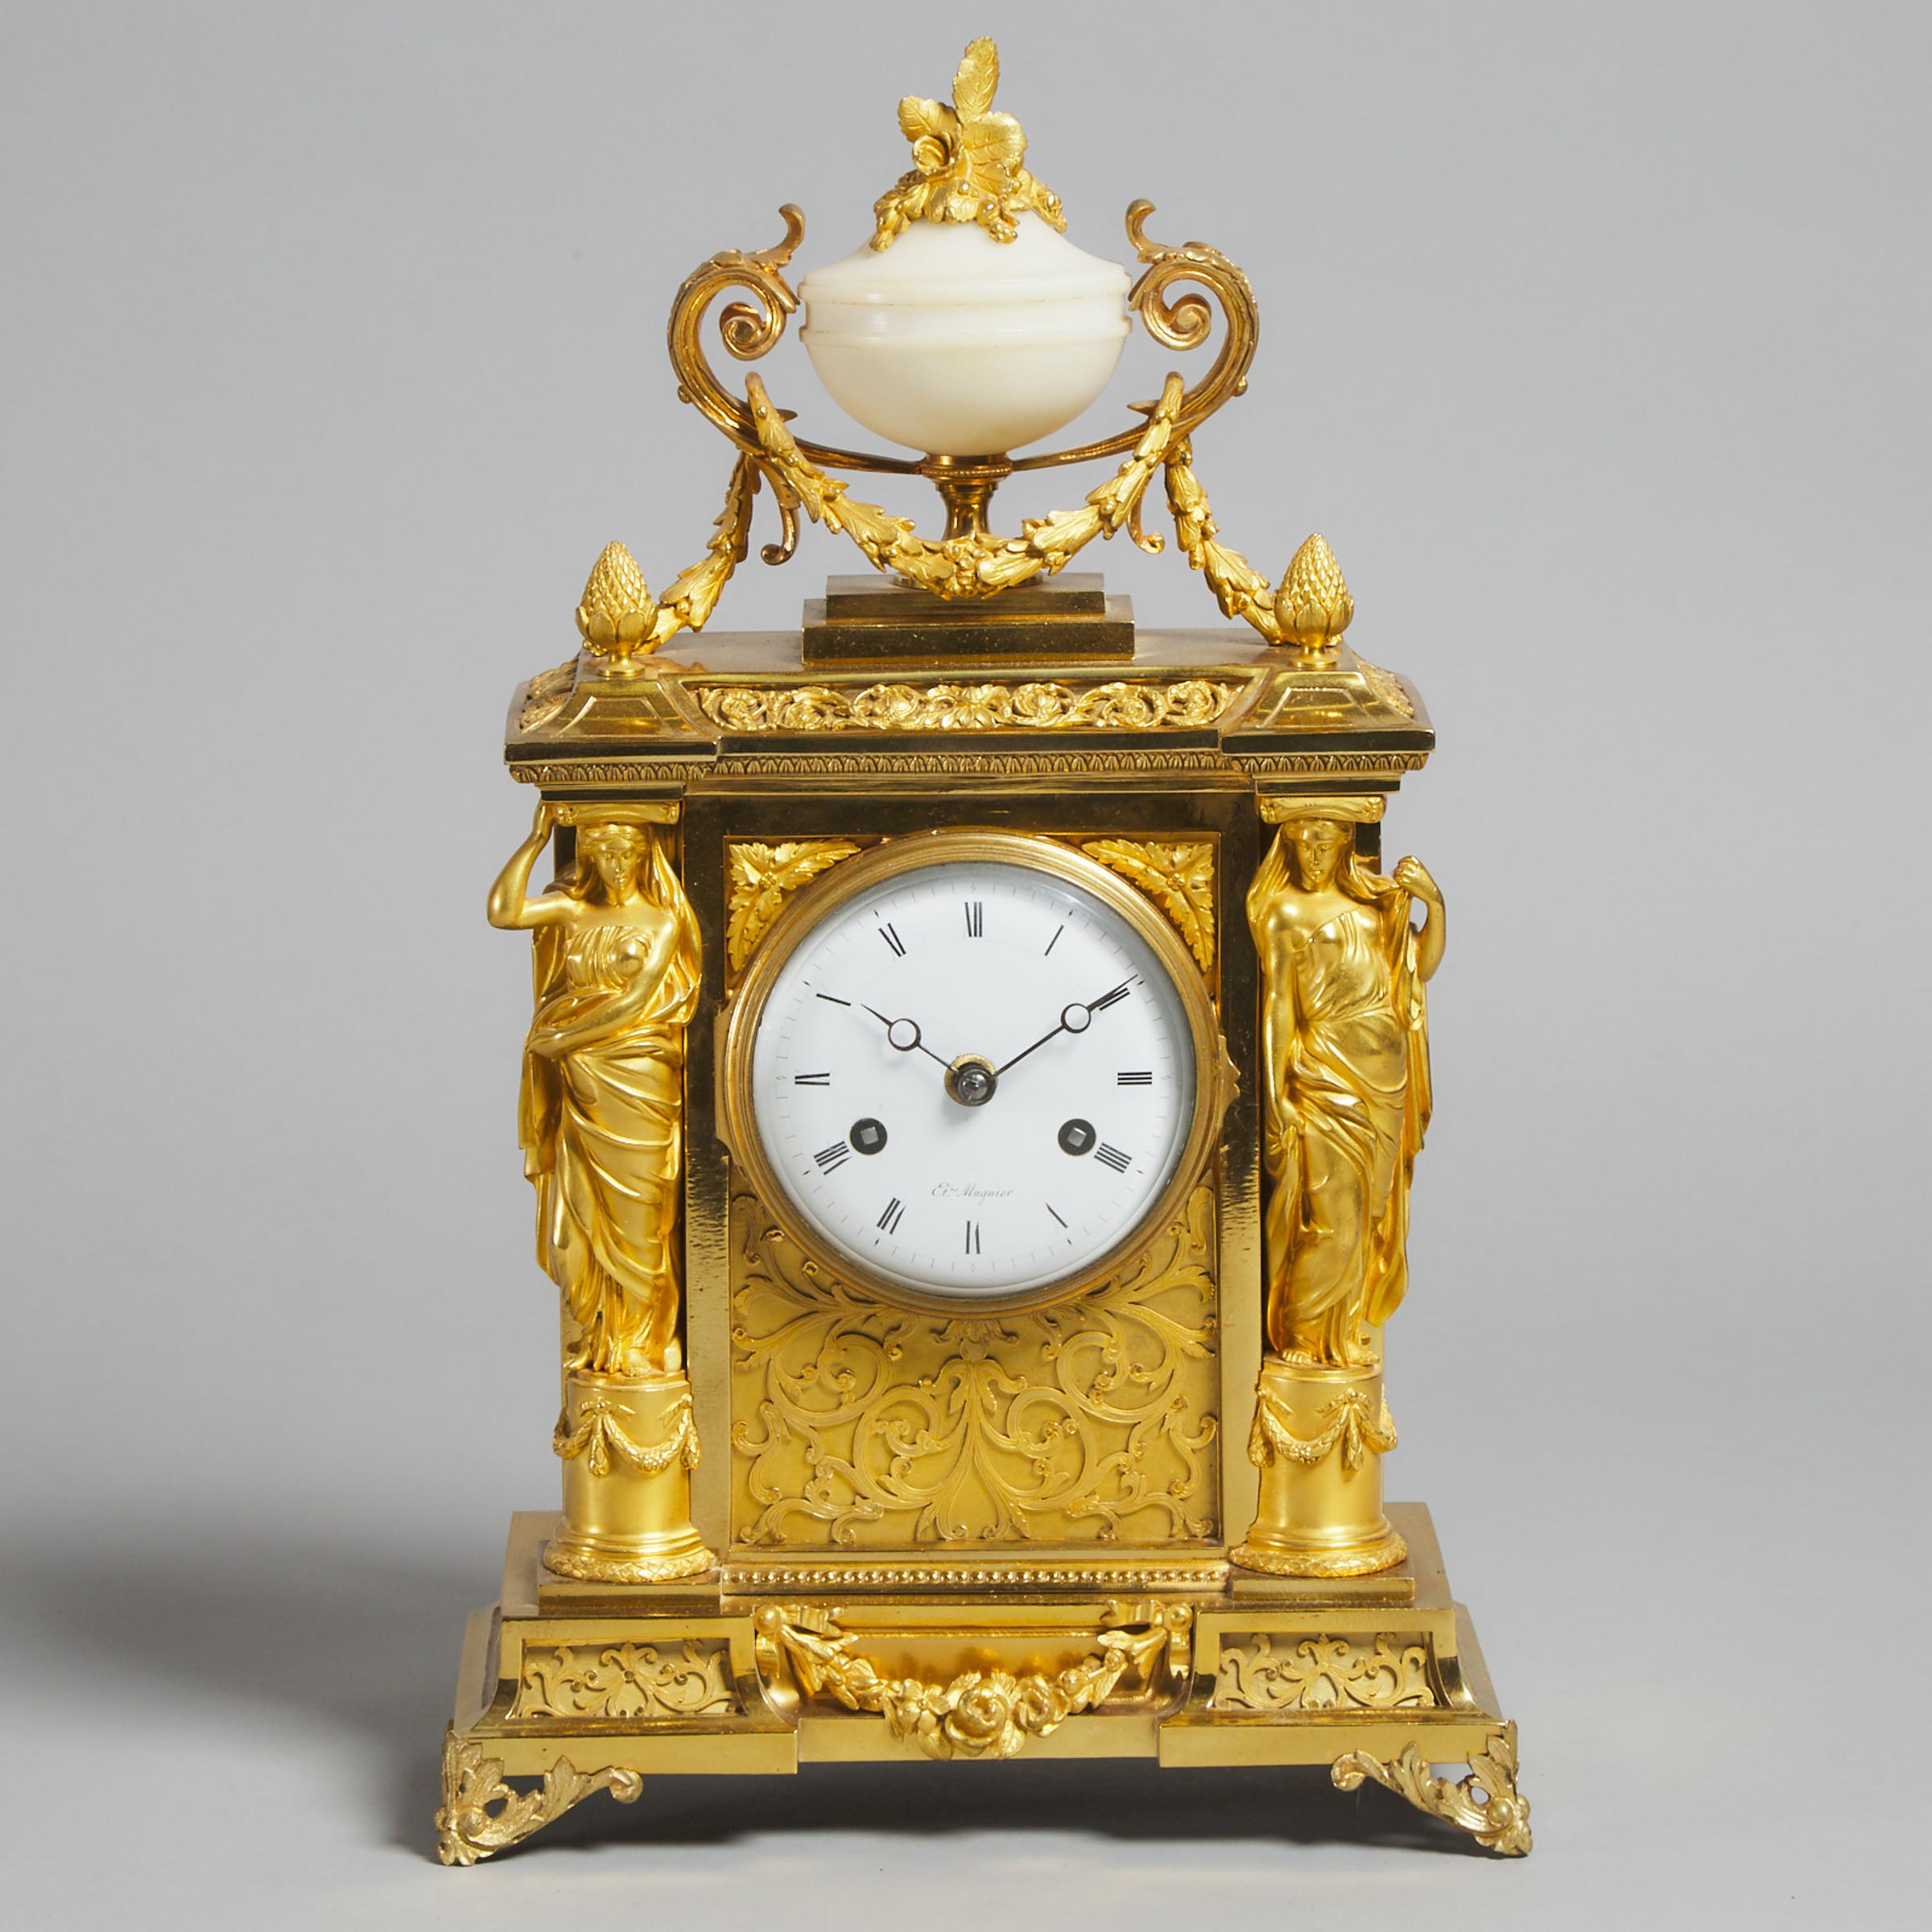 French Empire Gilt Bronze Mantle Clock, Etienne Mugnier, Paris, late 18th/early 19th century